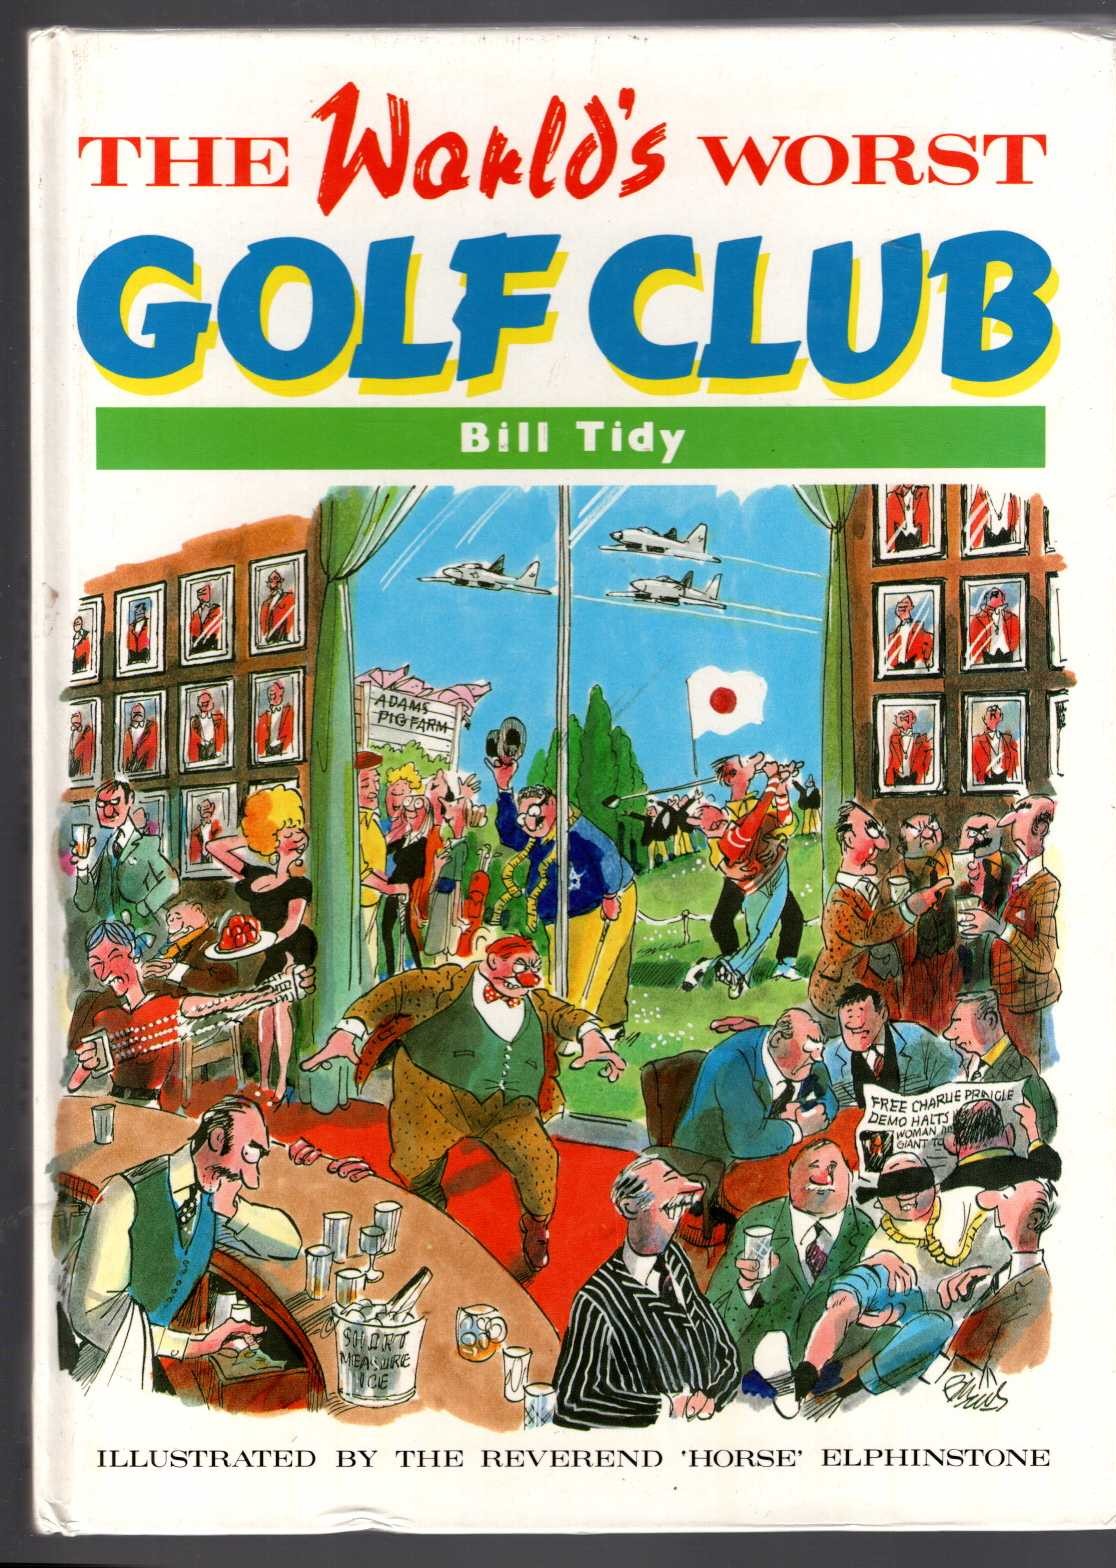 THE WORLD'S WORST GOLF CLUB front book cover image